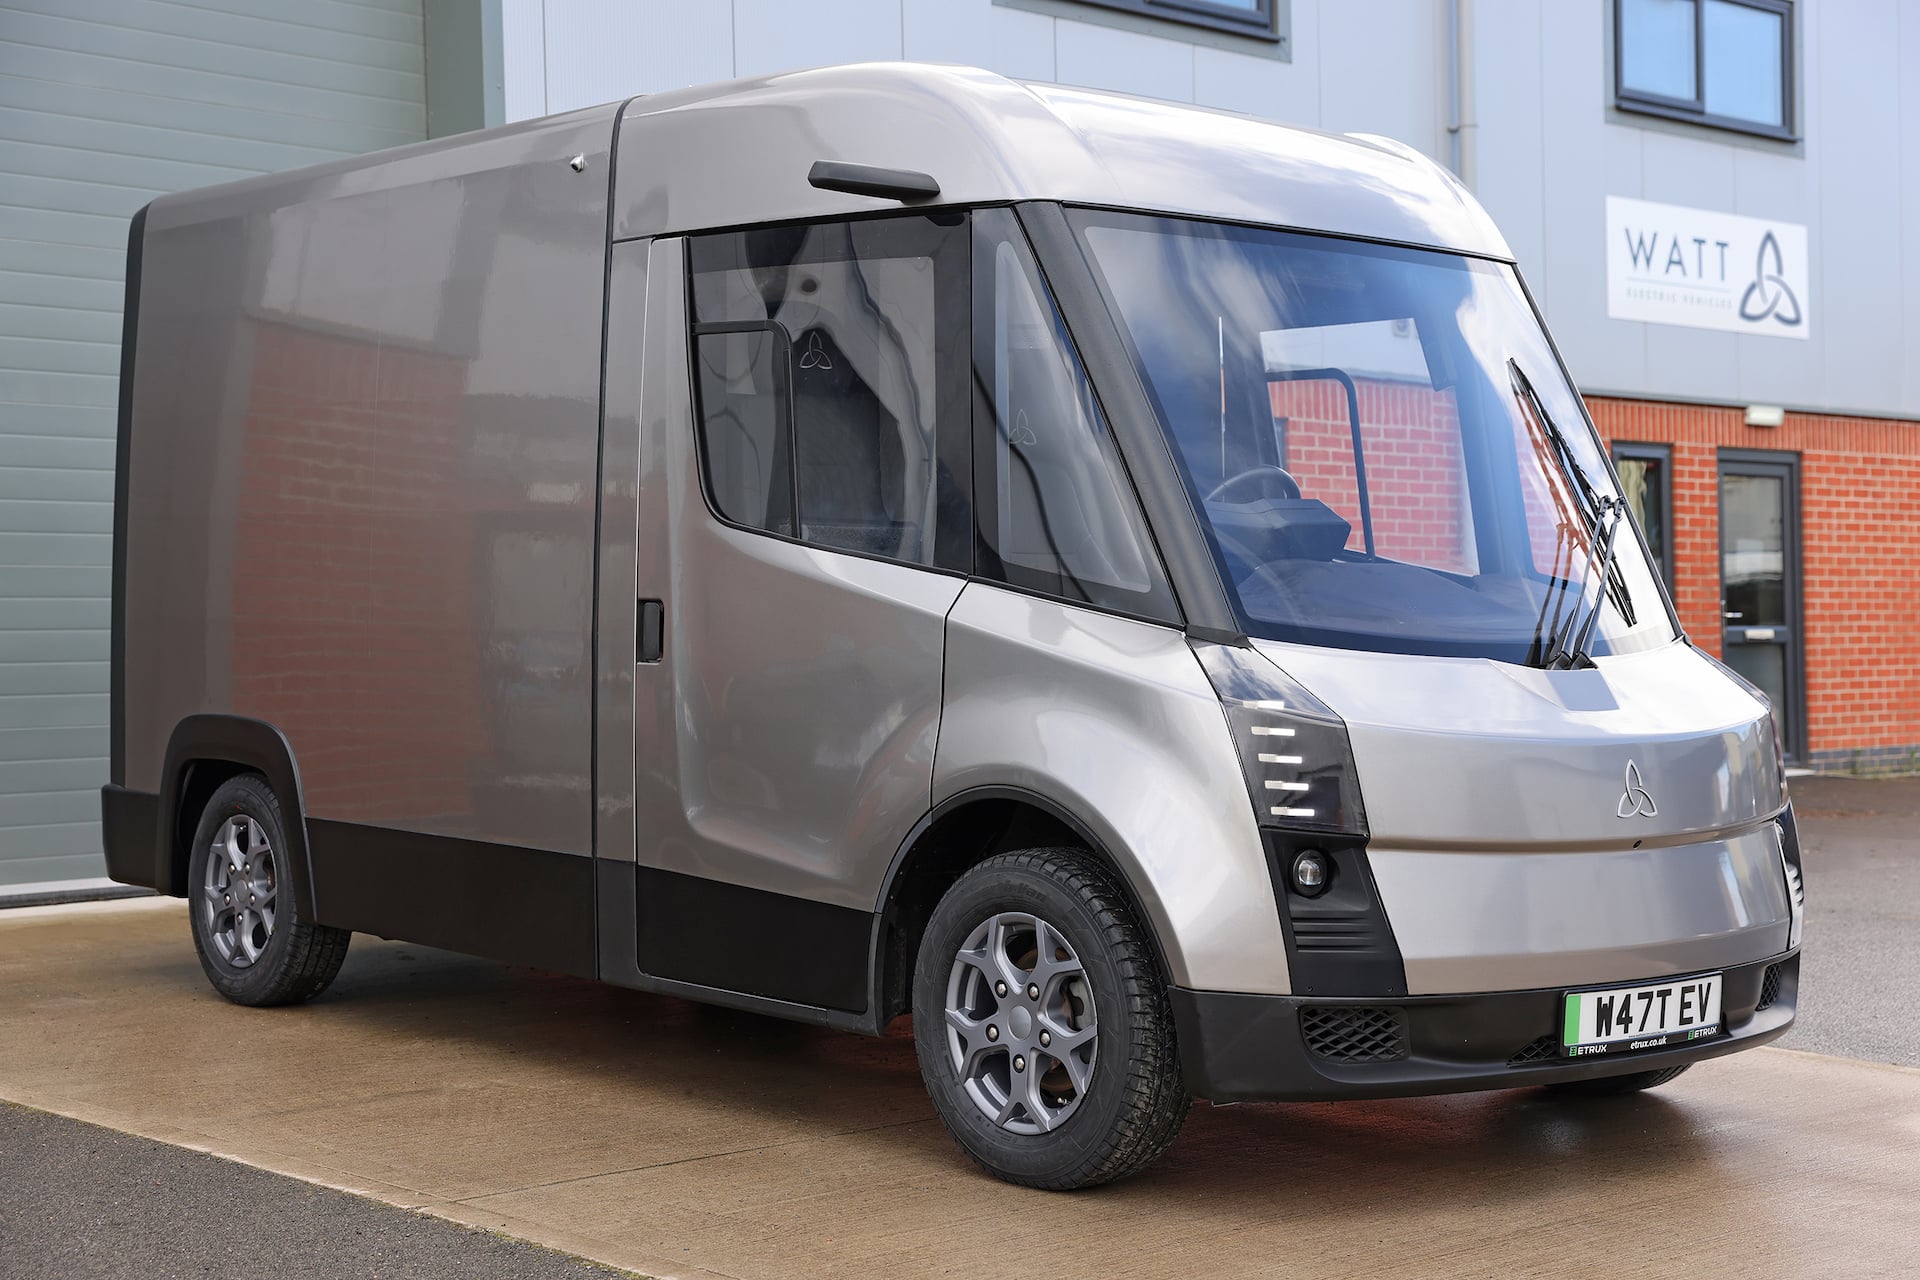 Watt Electric Vehicle Company Unveils Innovative Light Electric Van at Commercial Vehicle Show